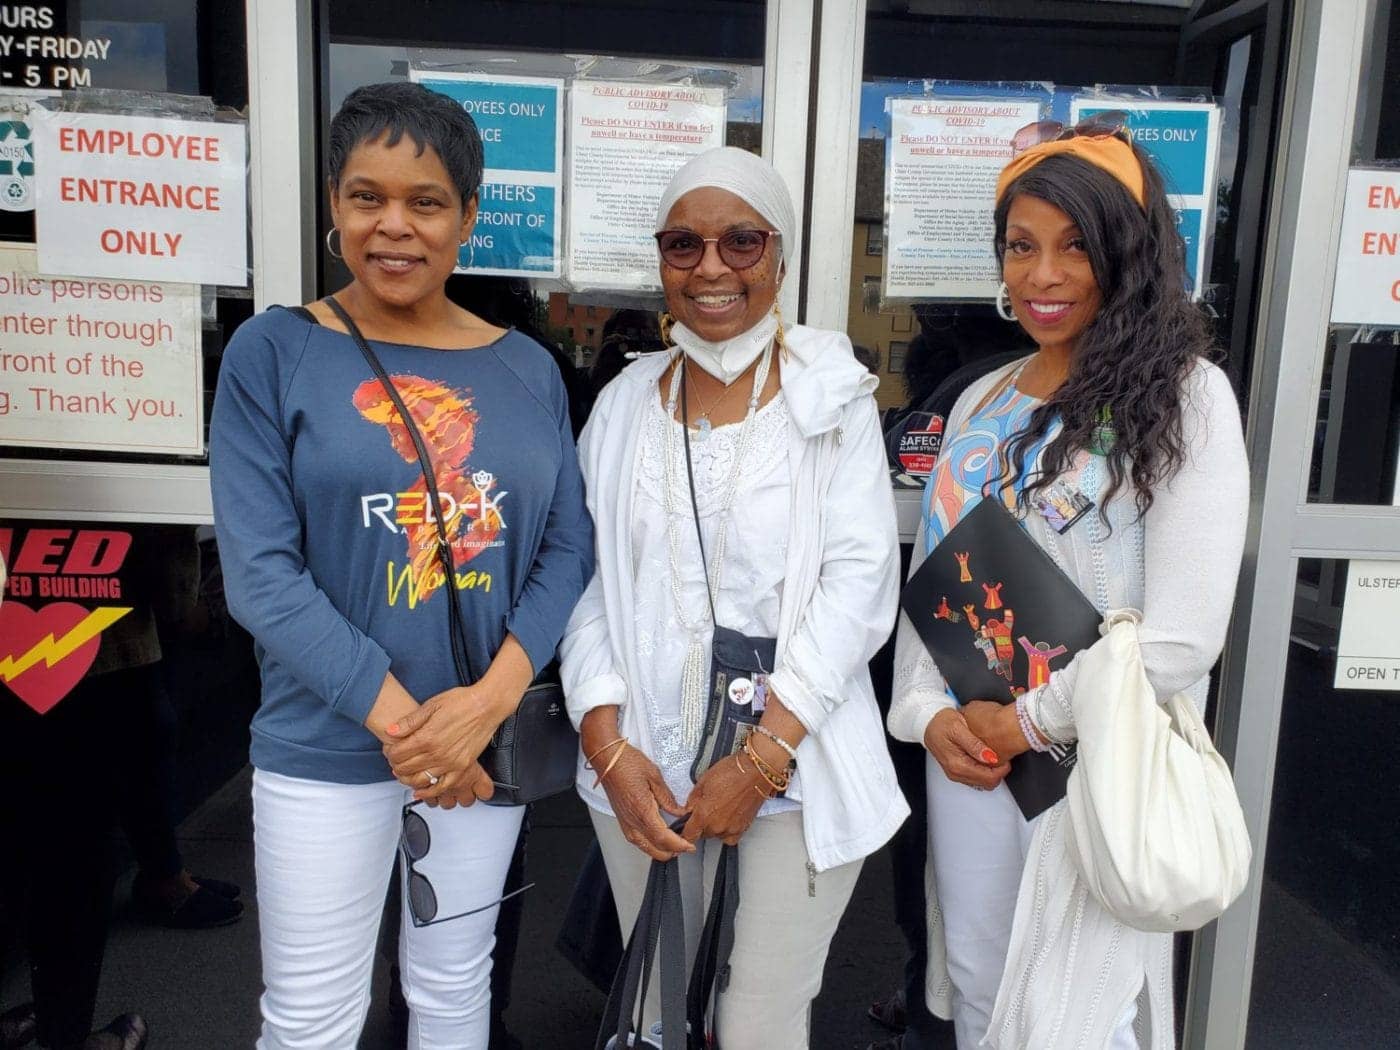 Sojourner-Truths-great-granddaughters-Barbara-and-Kimberly-and-Wanda-Sabir-Ulster-County-061822-1400x1050, <strong>40 days and 39 nights: Wanda Sabir journeys with Sojourner Truth </strong>, Culture Currents News & Views 